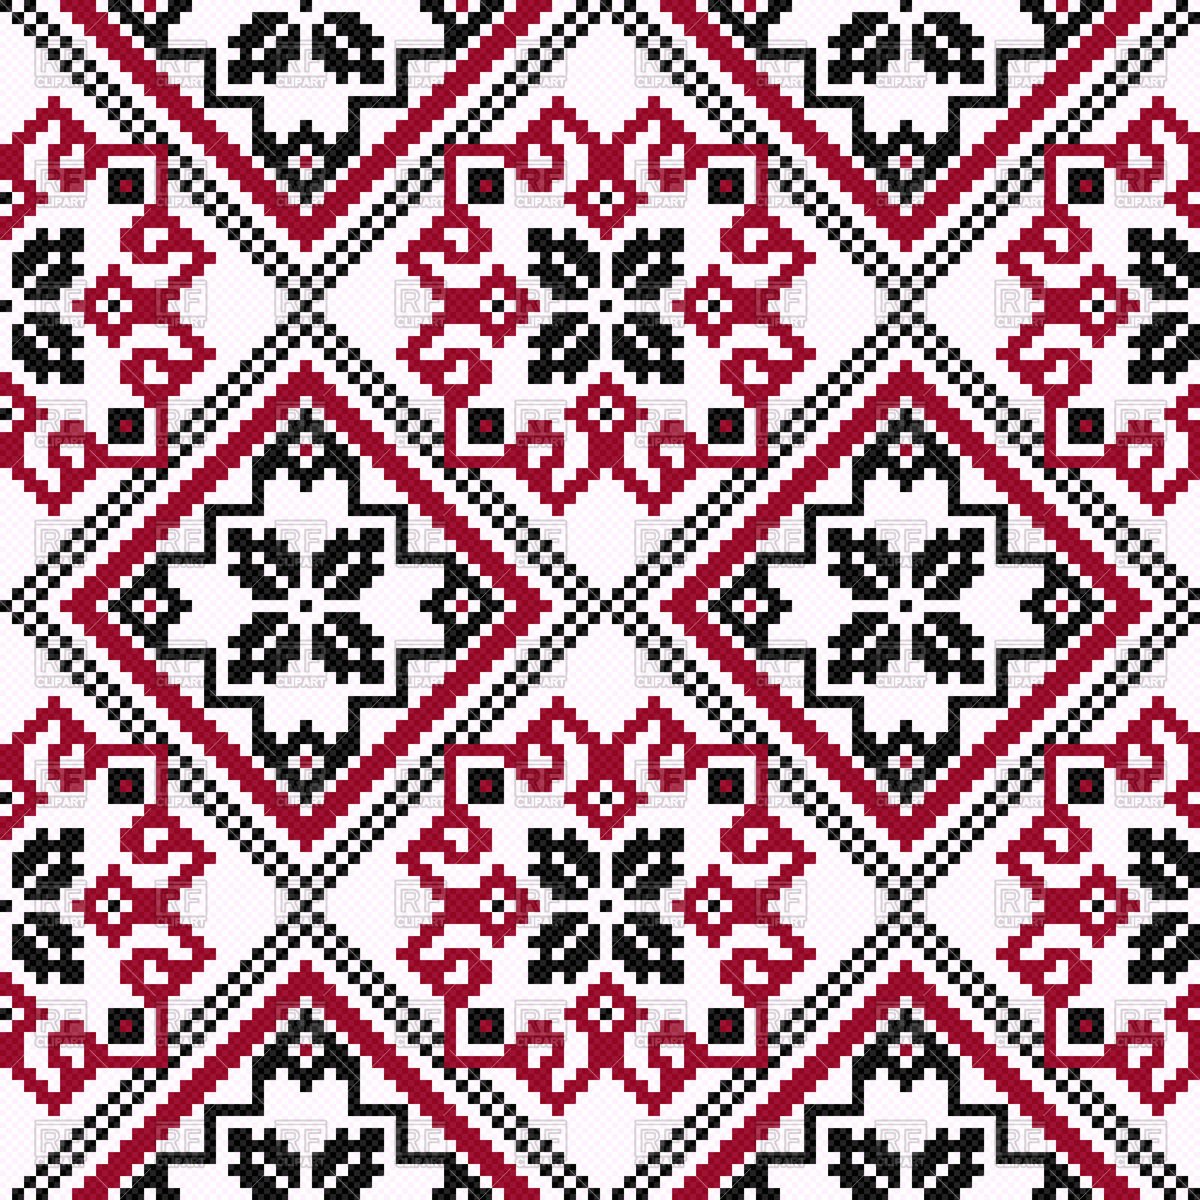 Ethnic Embroidery Patterns Ethnic Ukrainian Geometric Embroidery In Hues Of Black And Red On The Light Pink Background Stock Vector Image